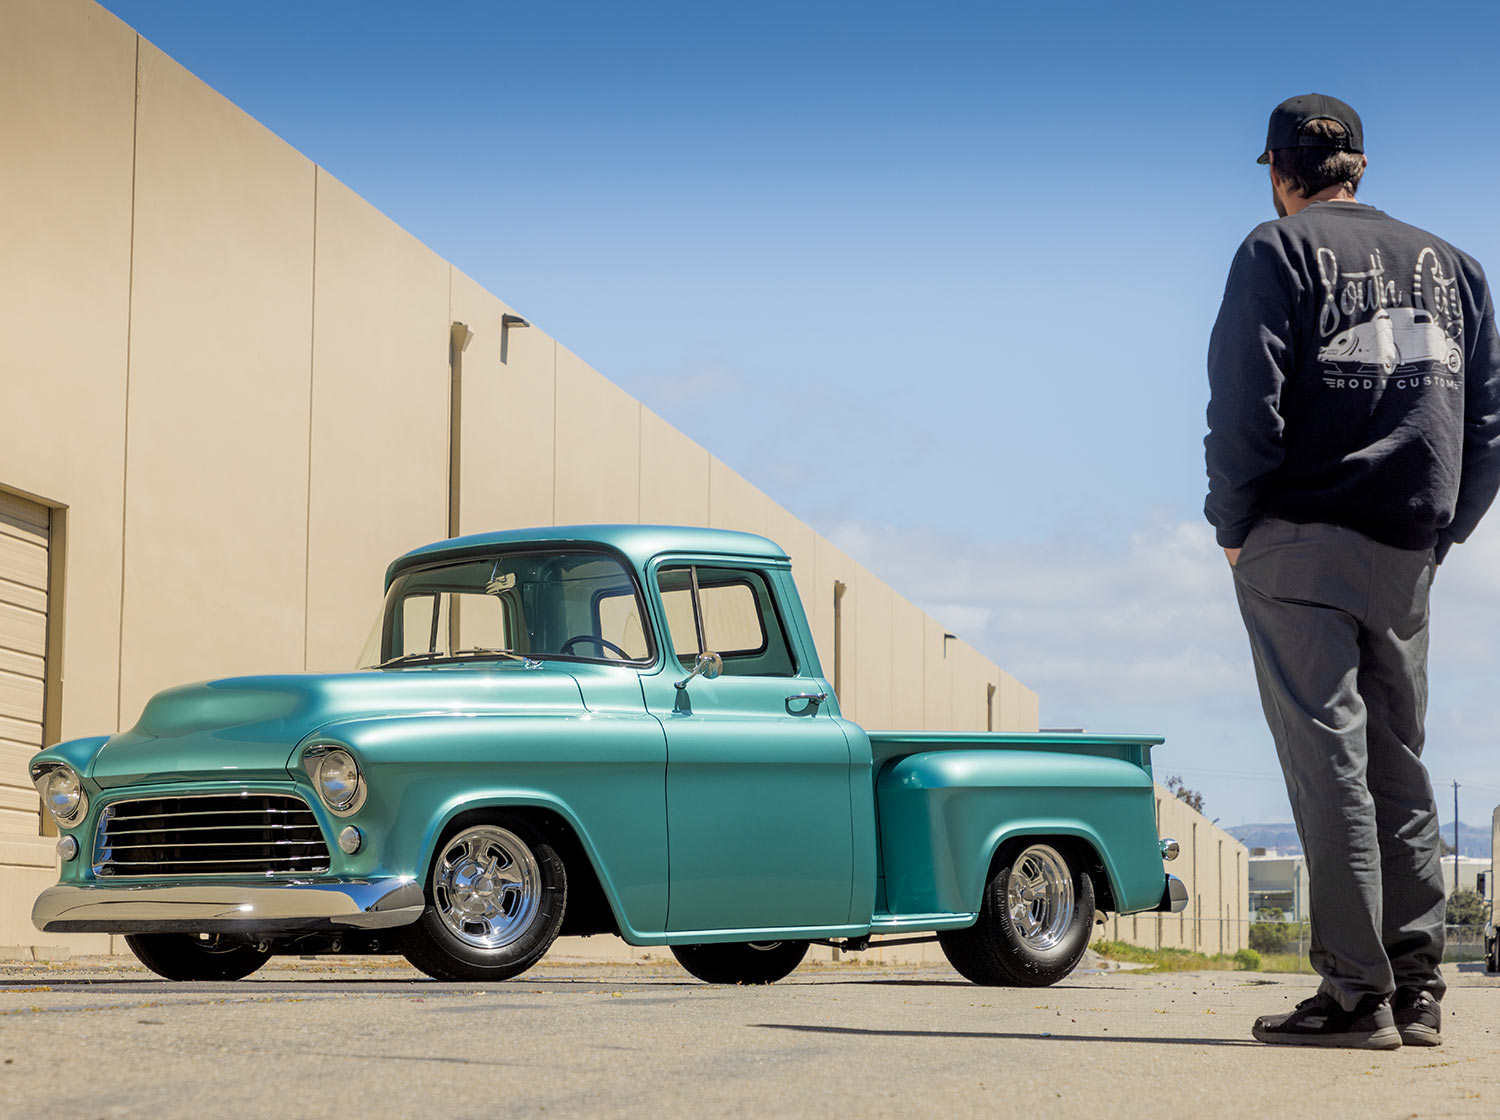 back view of a man admiring the sea green ’56 Chevy truck parked in an empty lot beside a large factory